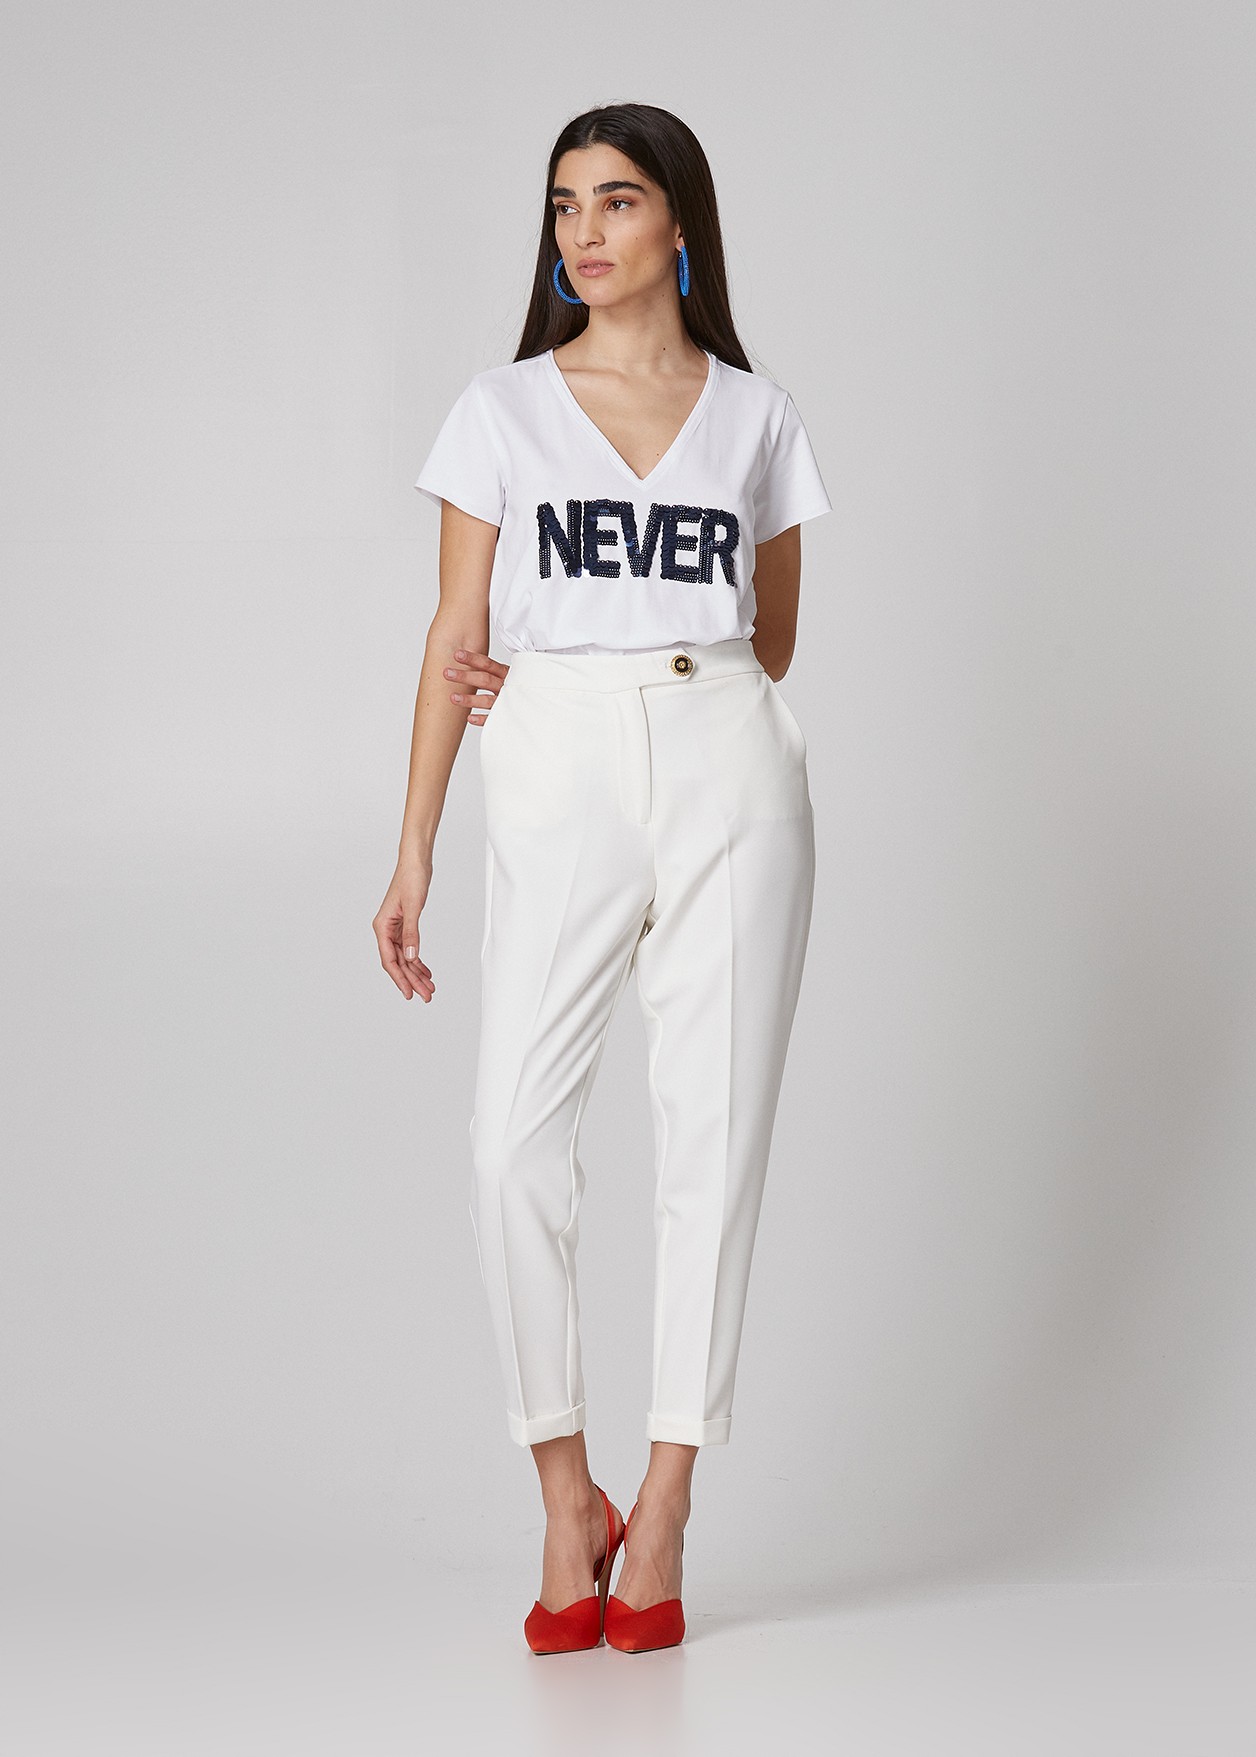 Blouse with print "Never"